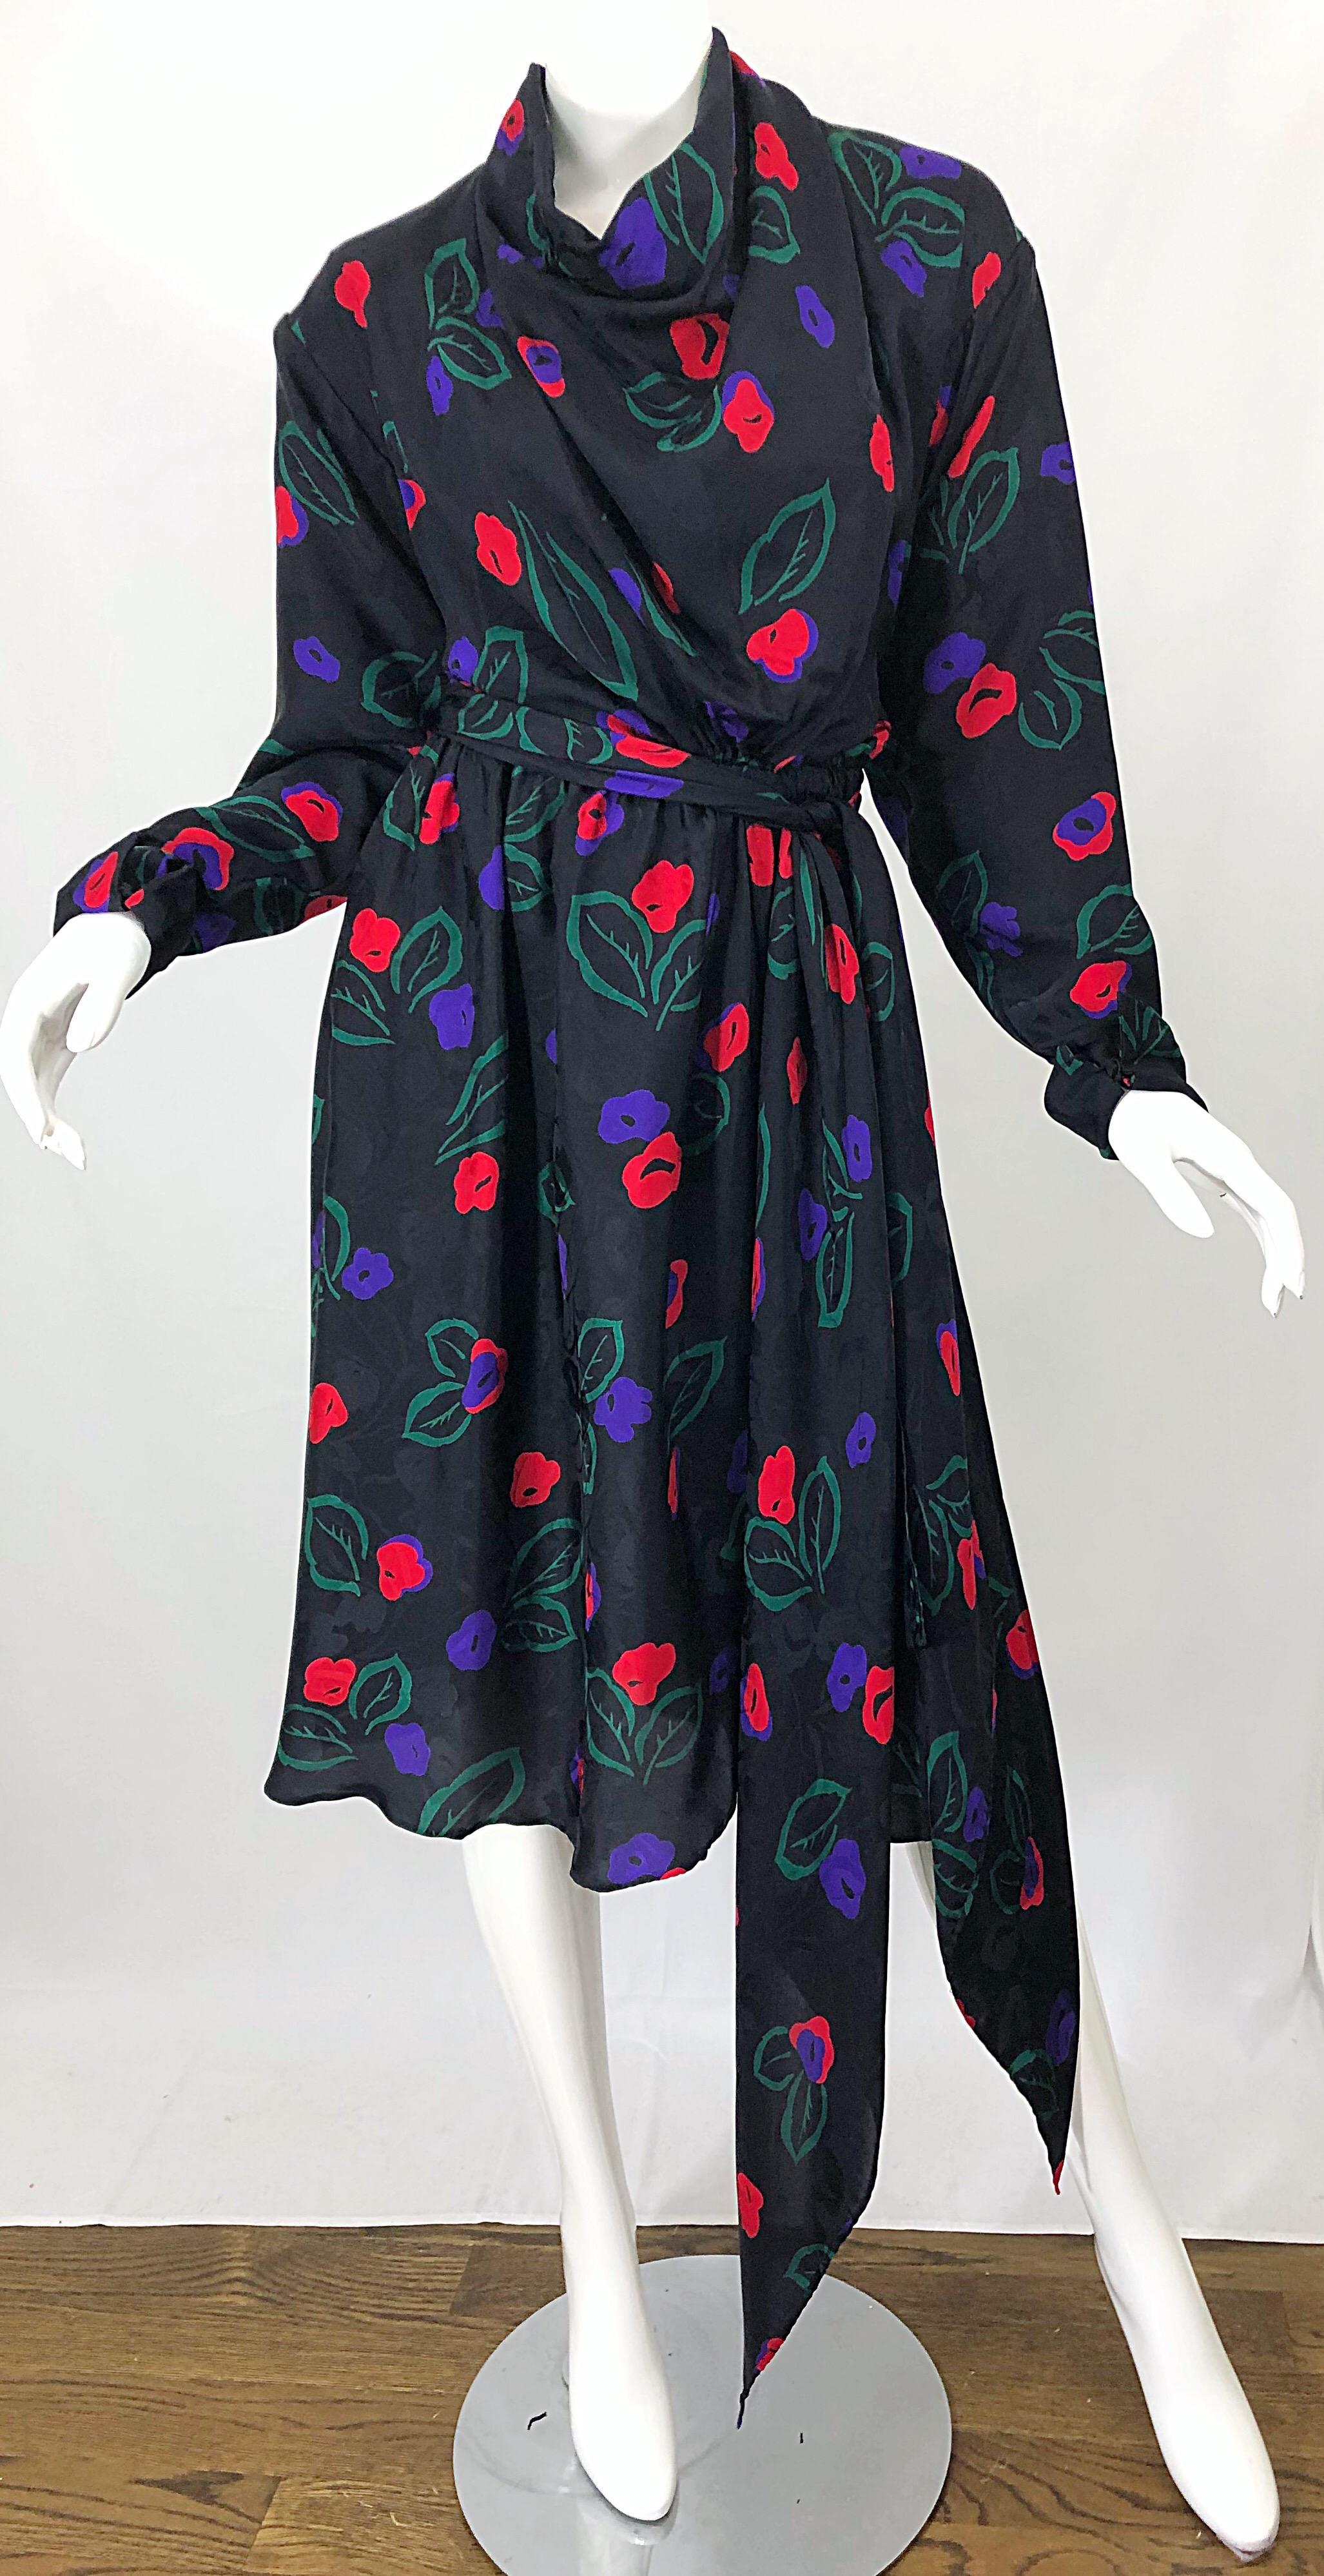 Chic and classic late 1970s HALSTON periwinkle print silk damask Avant Garde wrap dress and sash! Features periwinkles printed in vibrant hues of red, purple and green throughout. Wraps around the waist (which features an elastic band in the back)